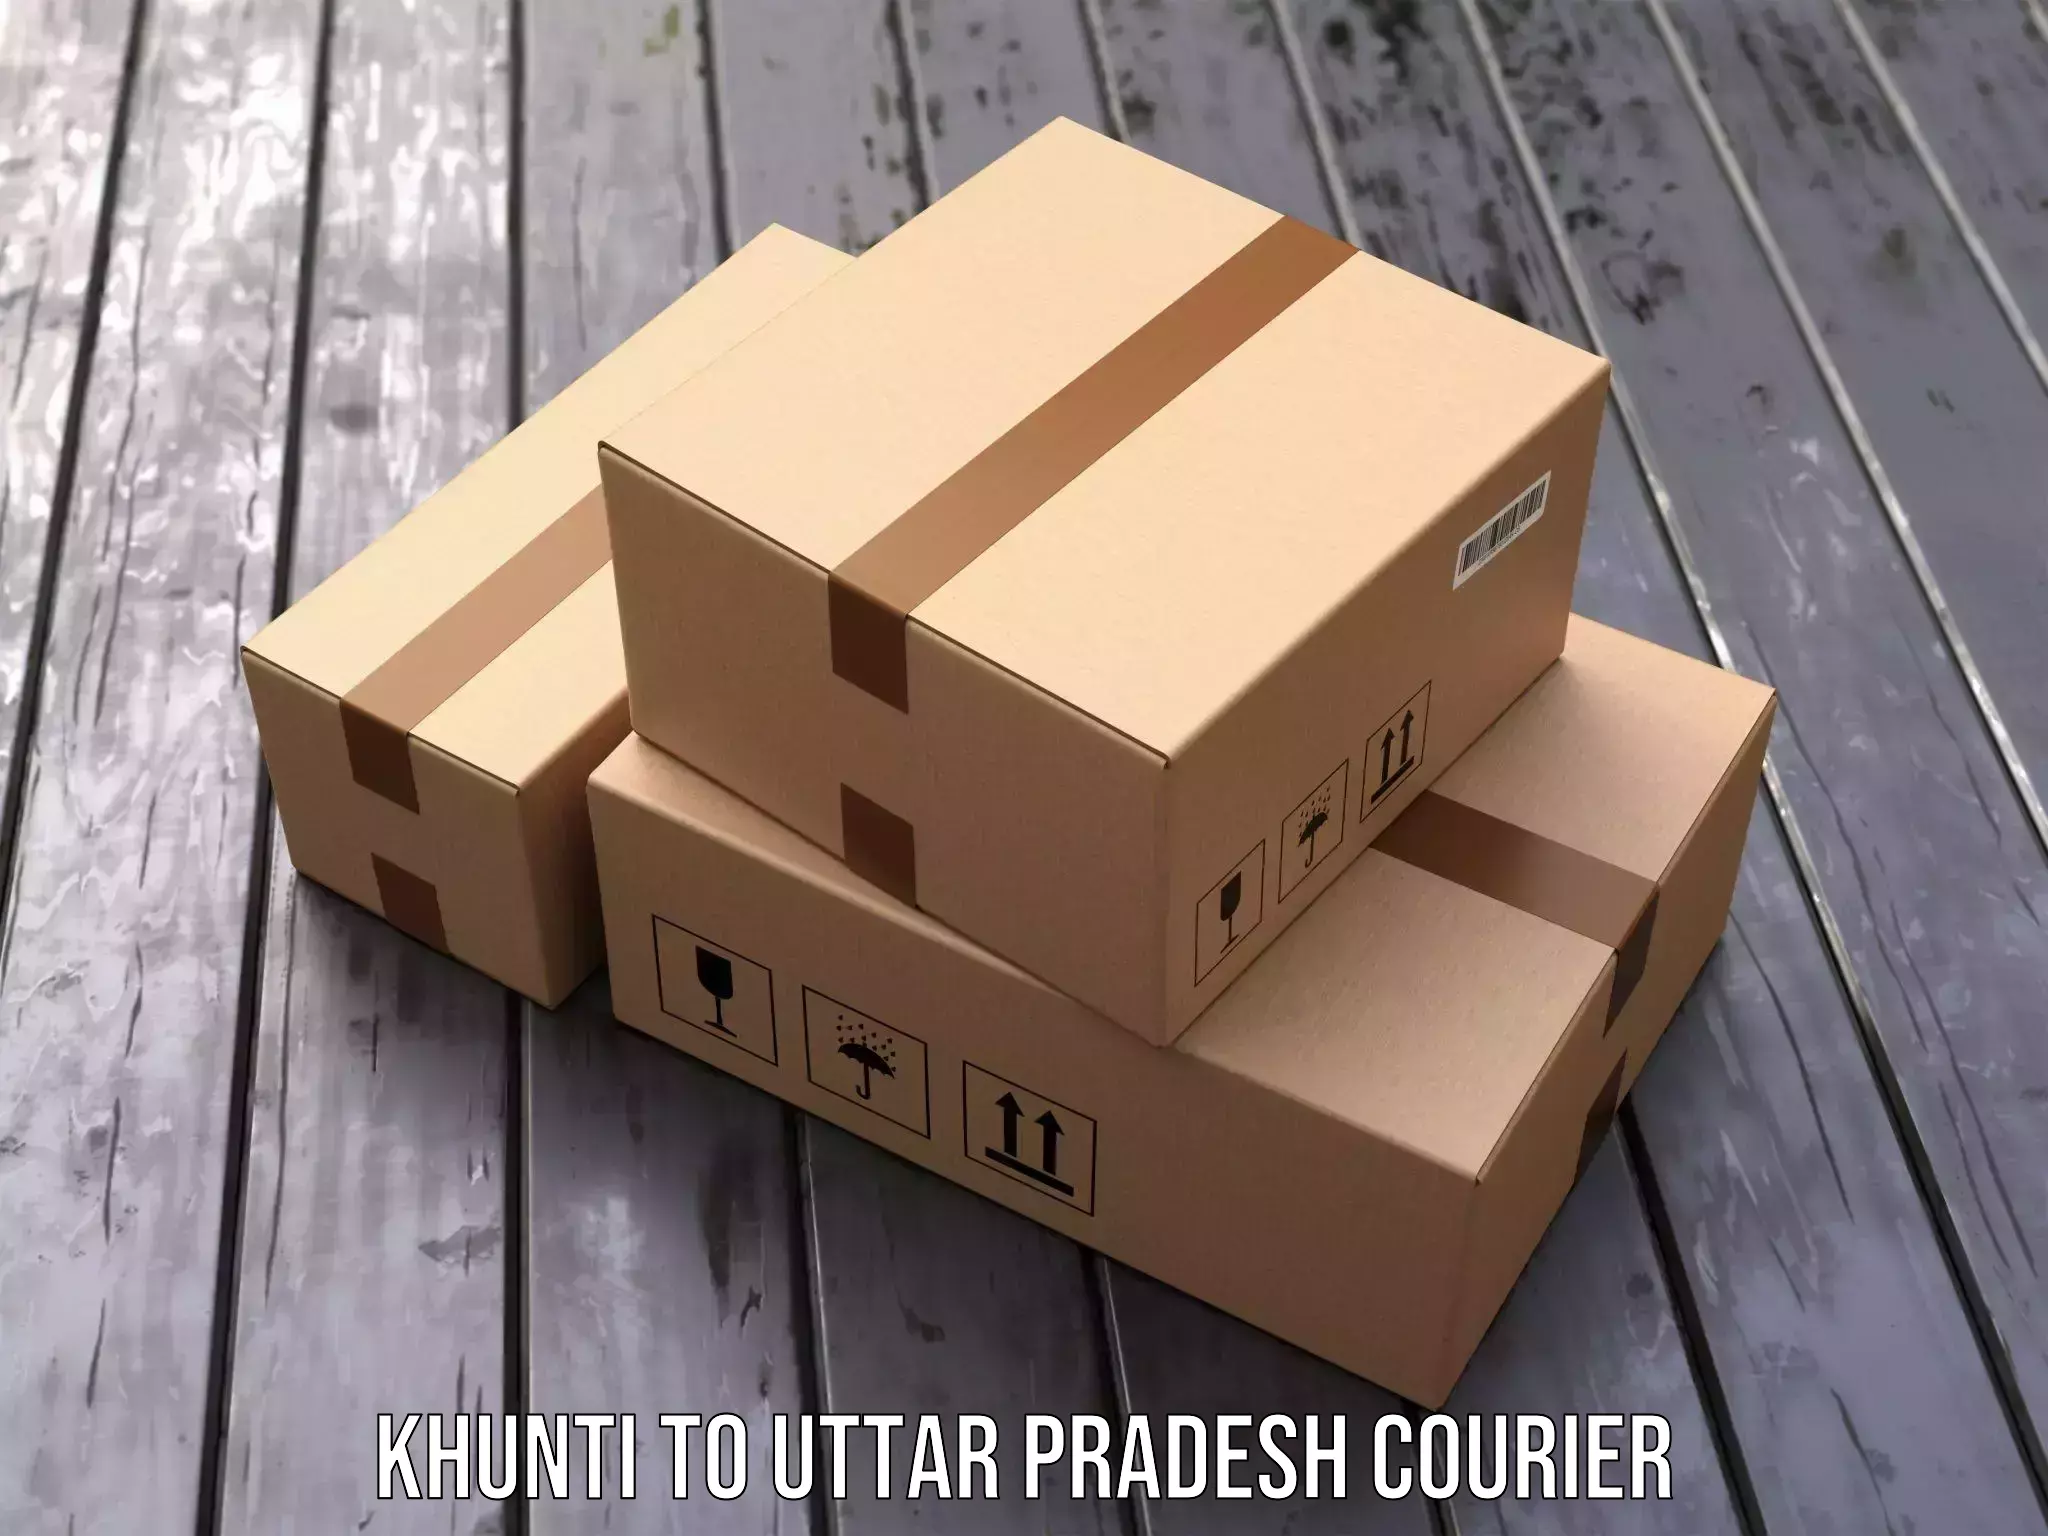 Pharmaceutical courier Khunti to Kanpur